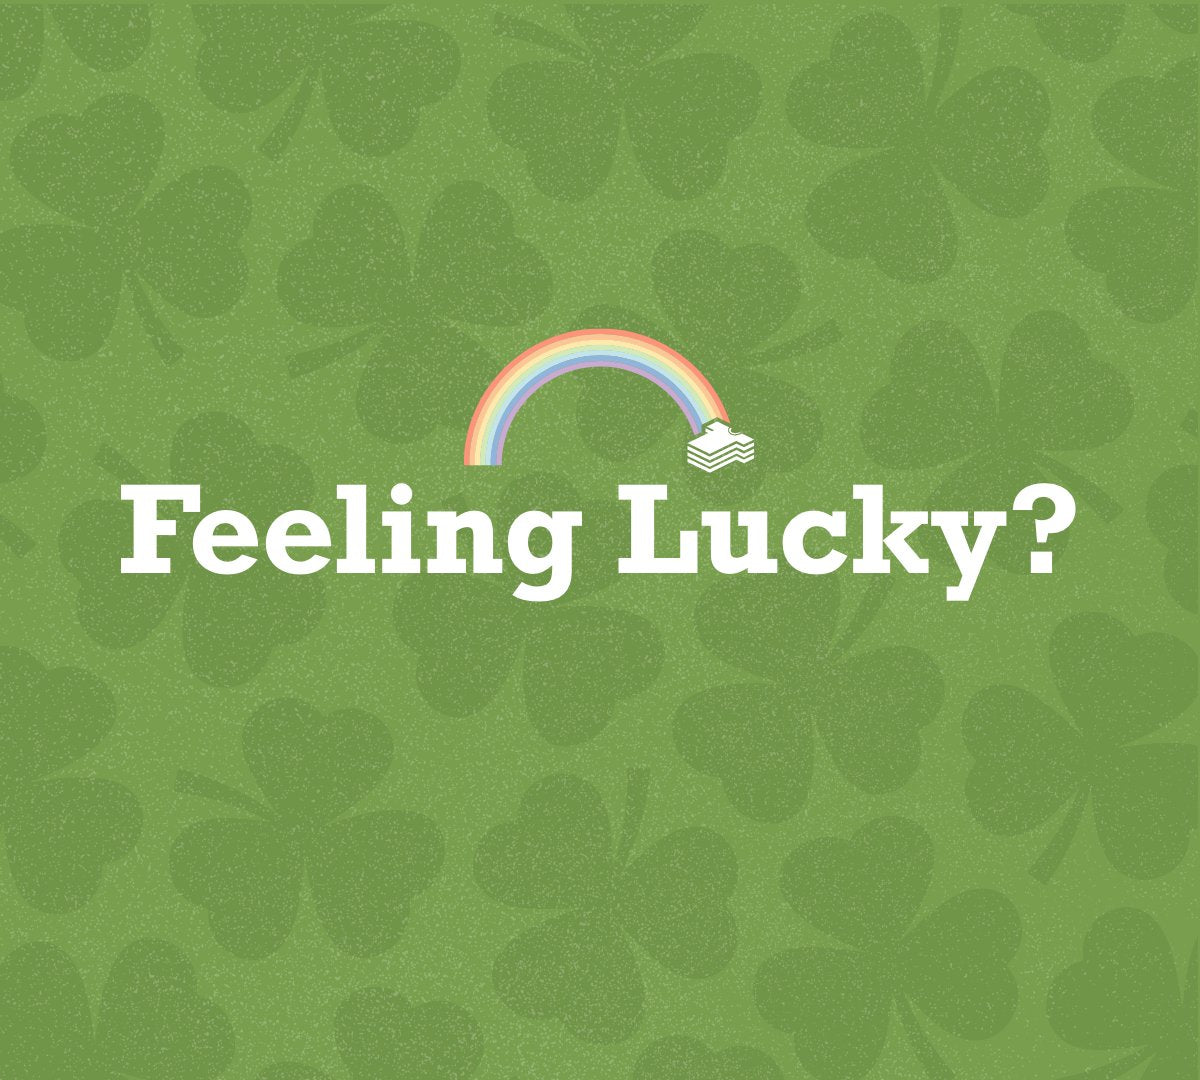 Threadsy's St. Patrick's Day Giveaway! - Threadsy